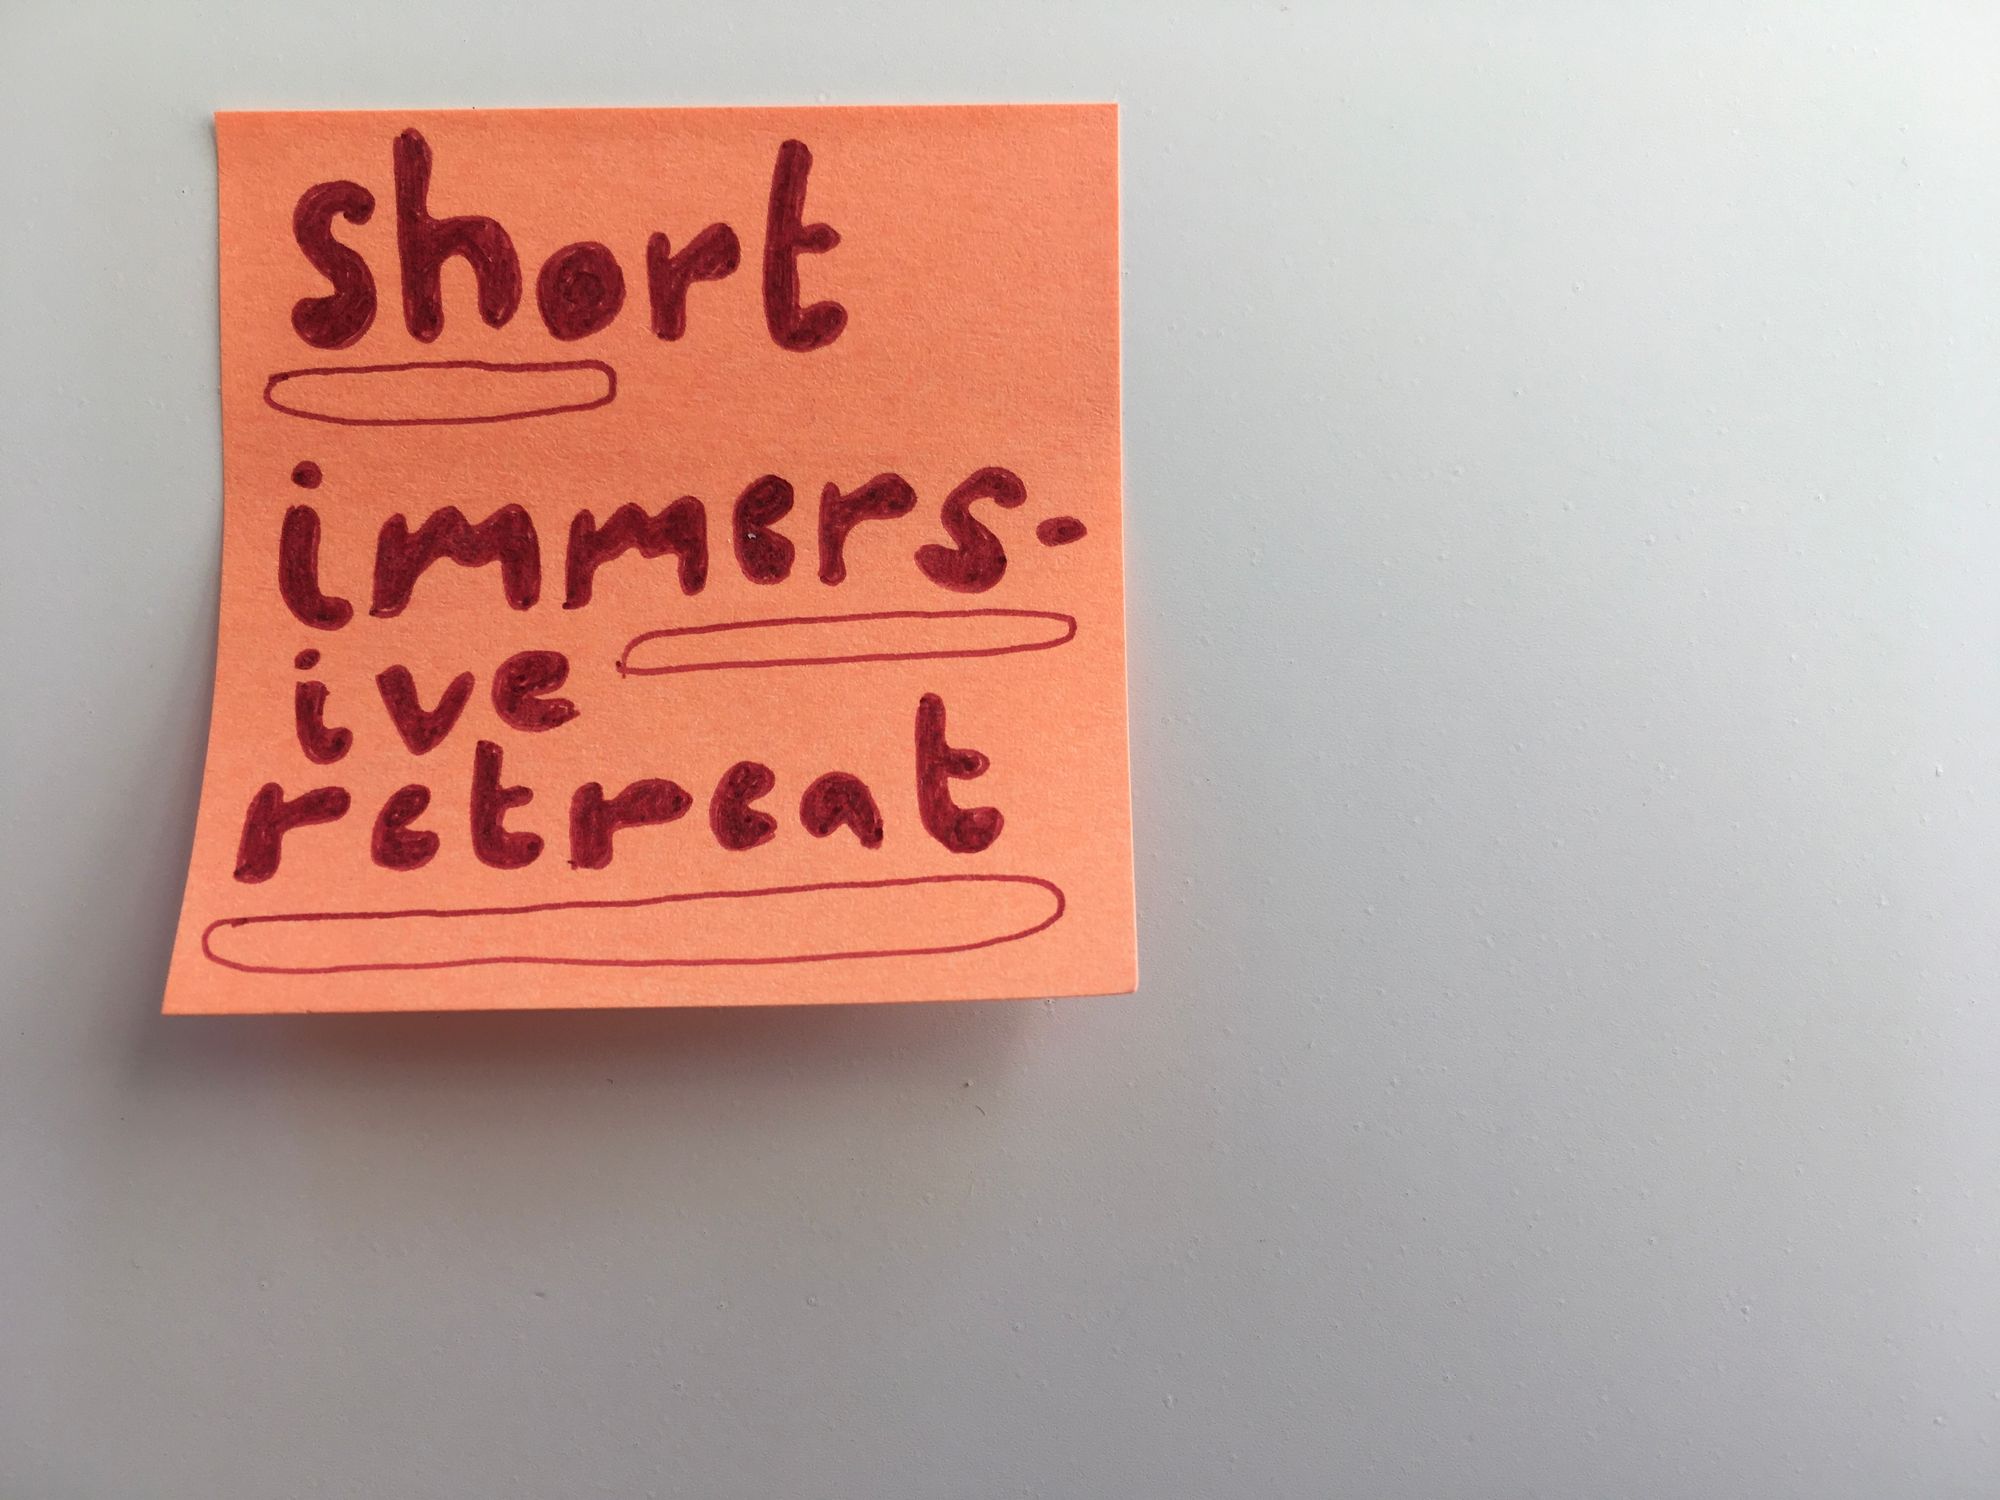 square orange sticky note stuck to upper right corner of white background with bubble letters handwritten: short (with a short bubble line drawn underneath), immers-ive (with a slightly longer bubble line drawn underneath) retreat (with a longer bubble ling drawn underneath)